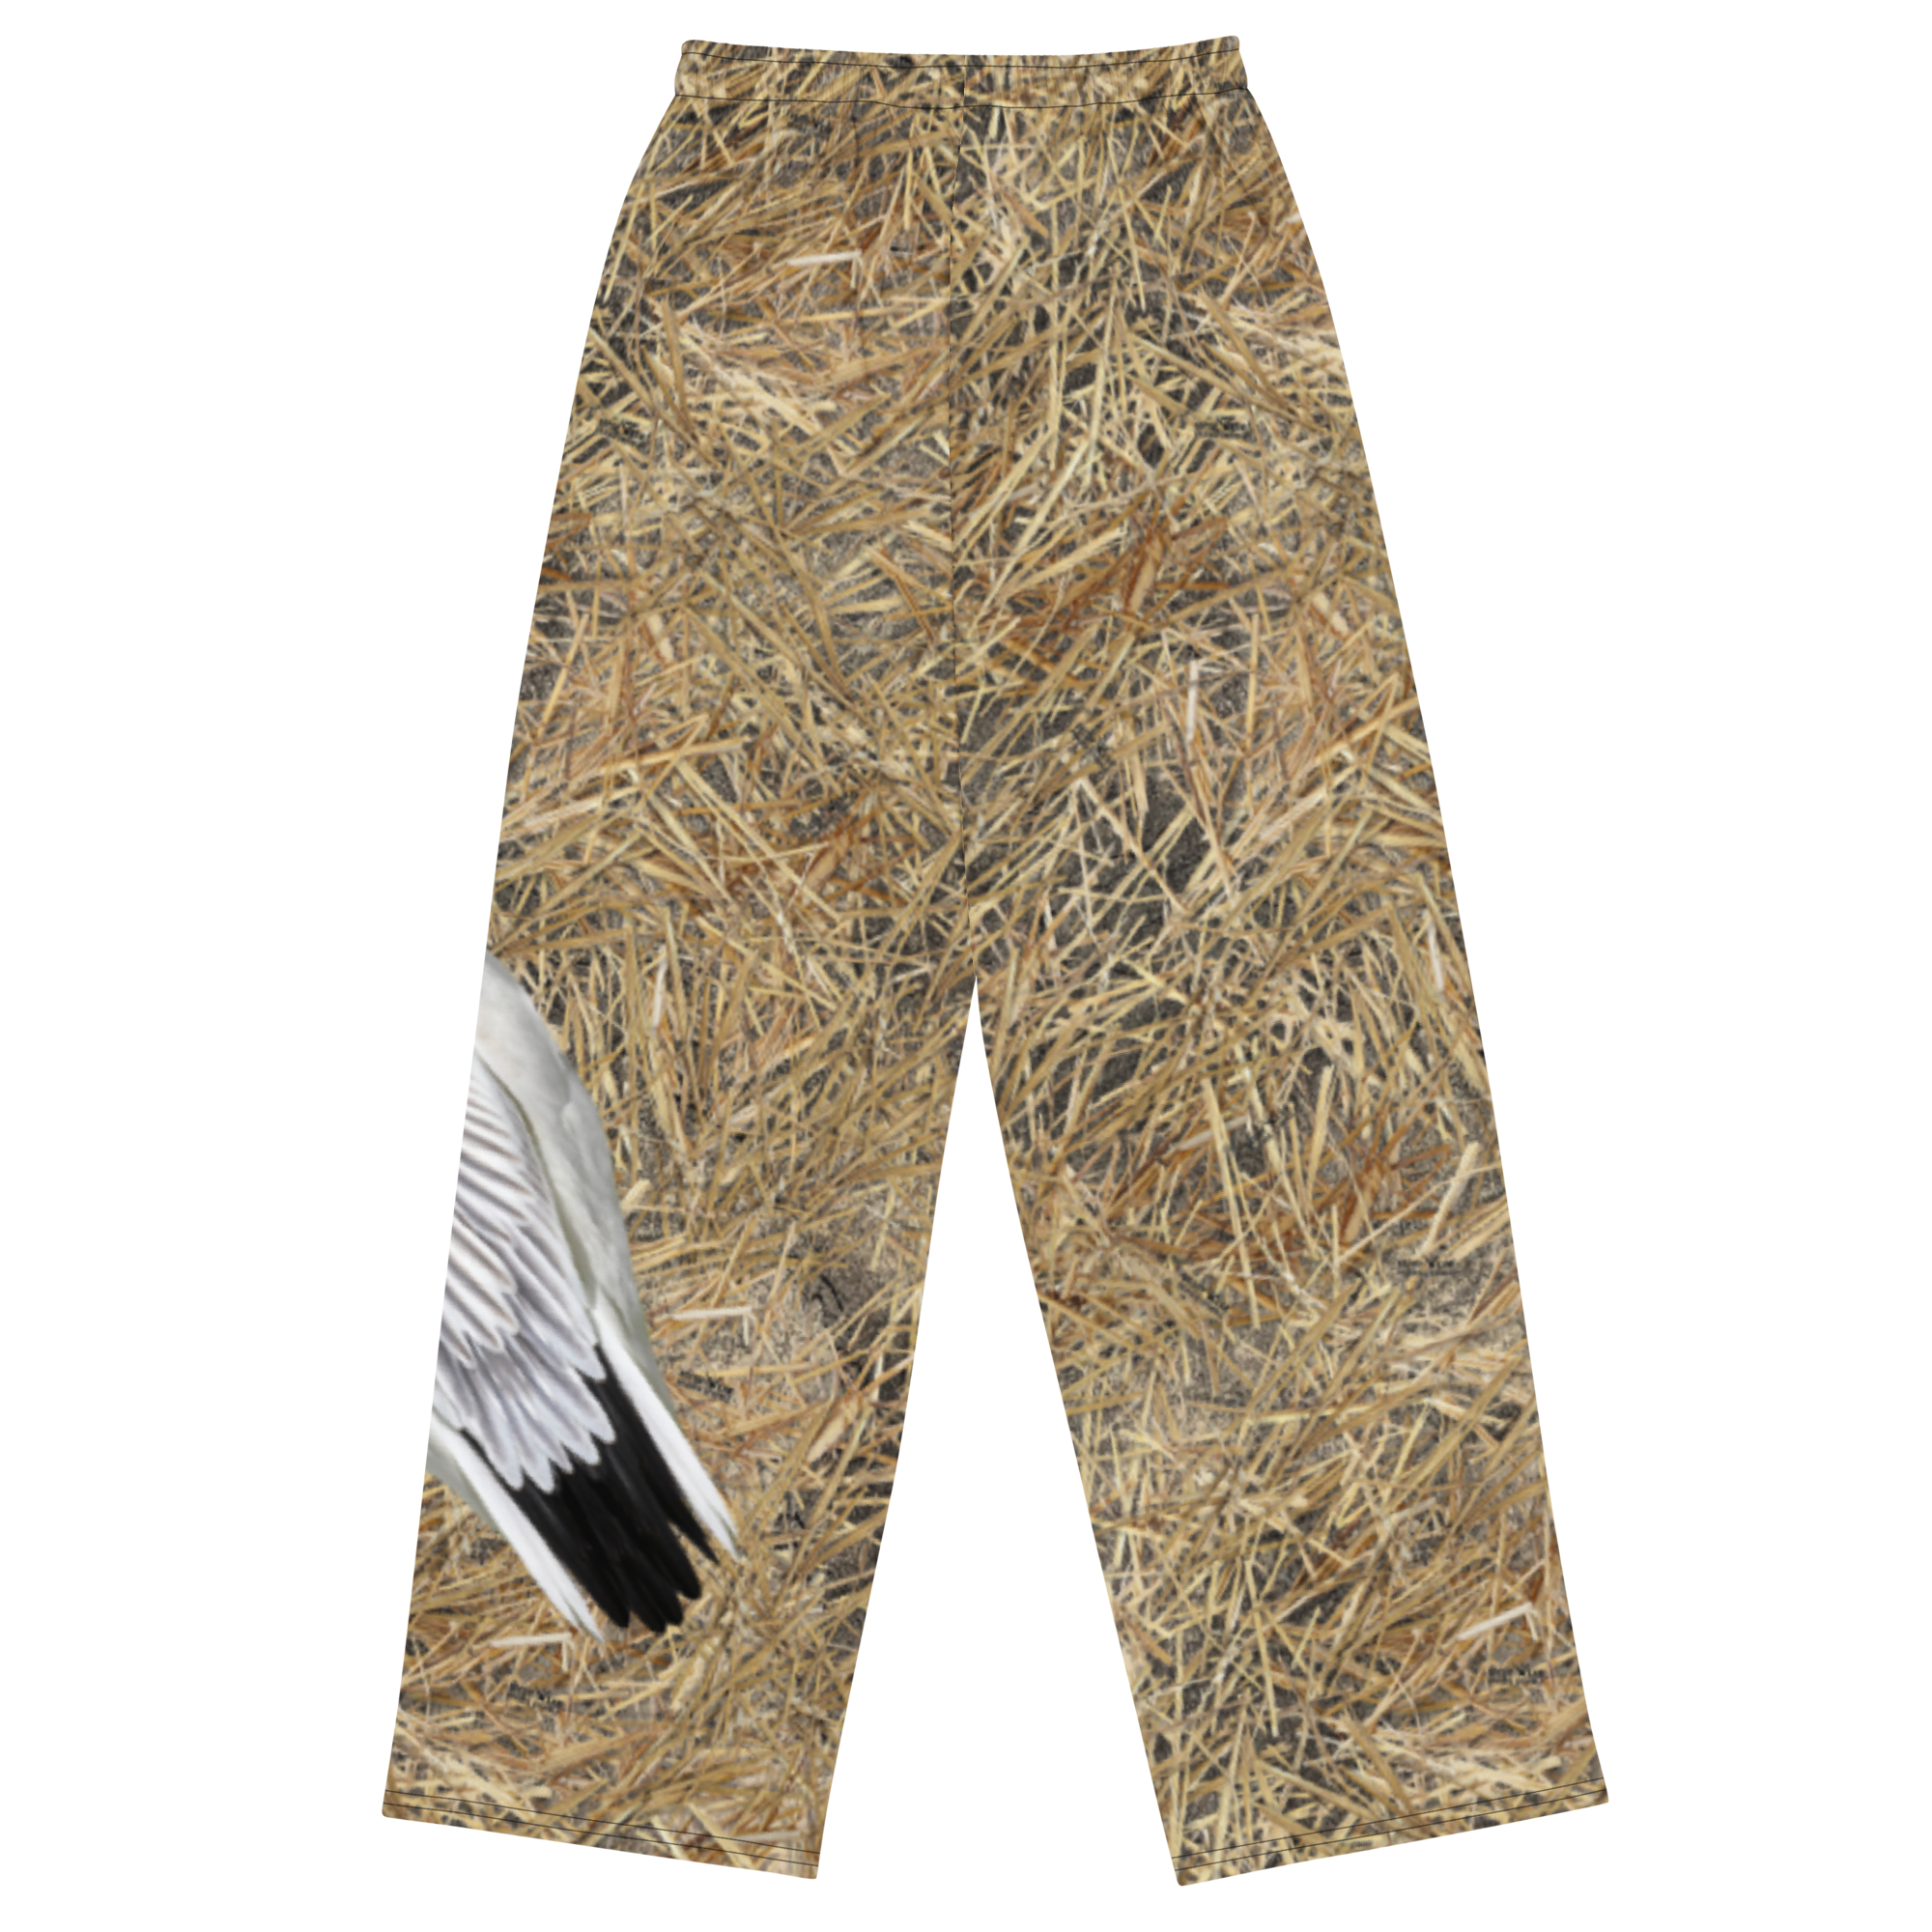 Pants Full Cover 1 – Snow Goose on Prairie Stubble – Decoy Wear by Ongaro –  Ongaro's